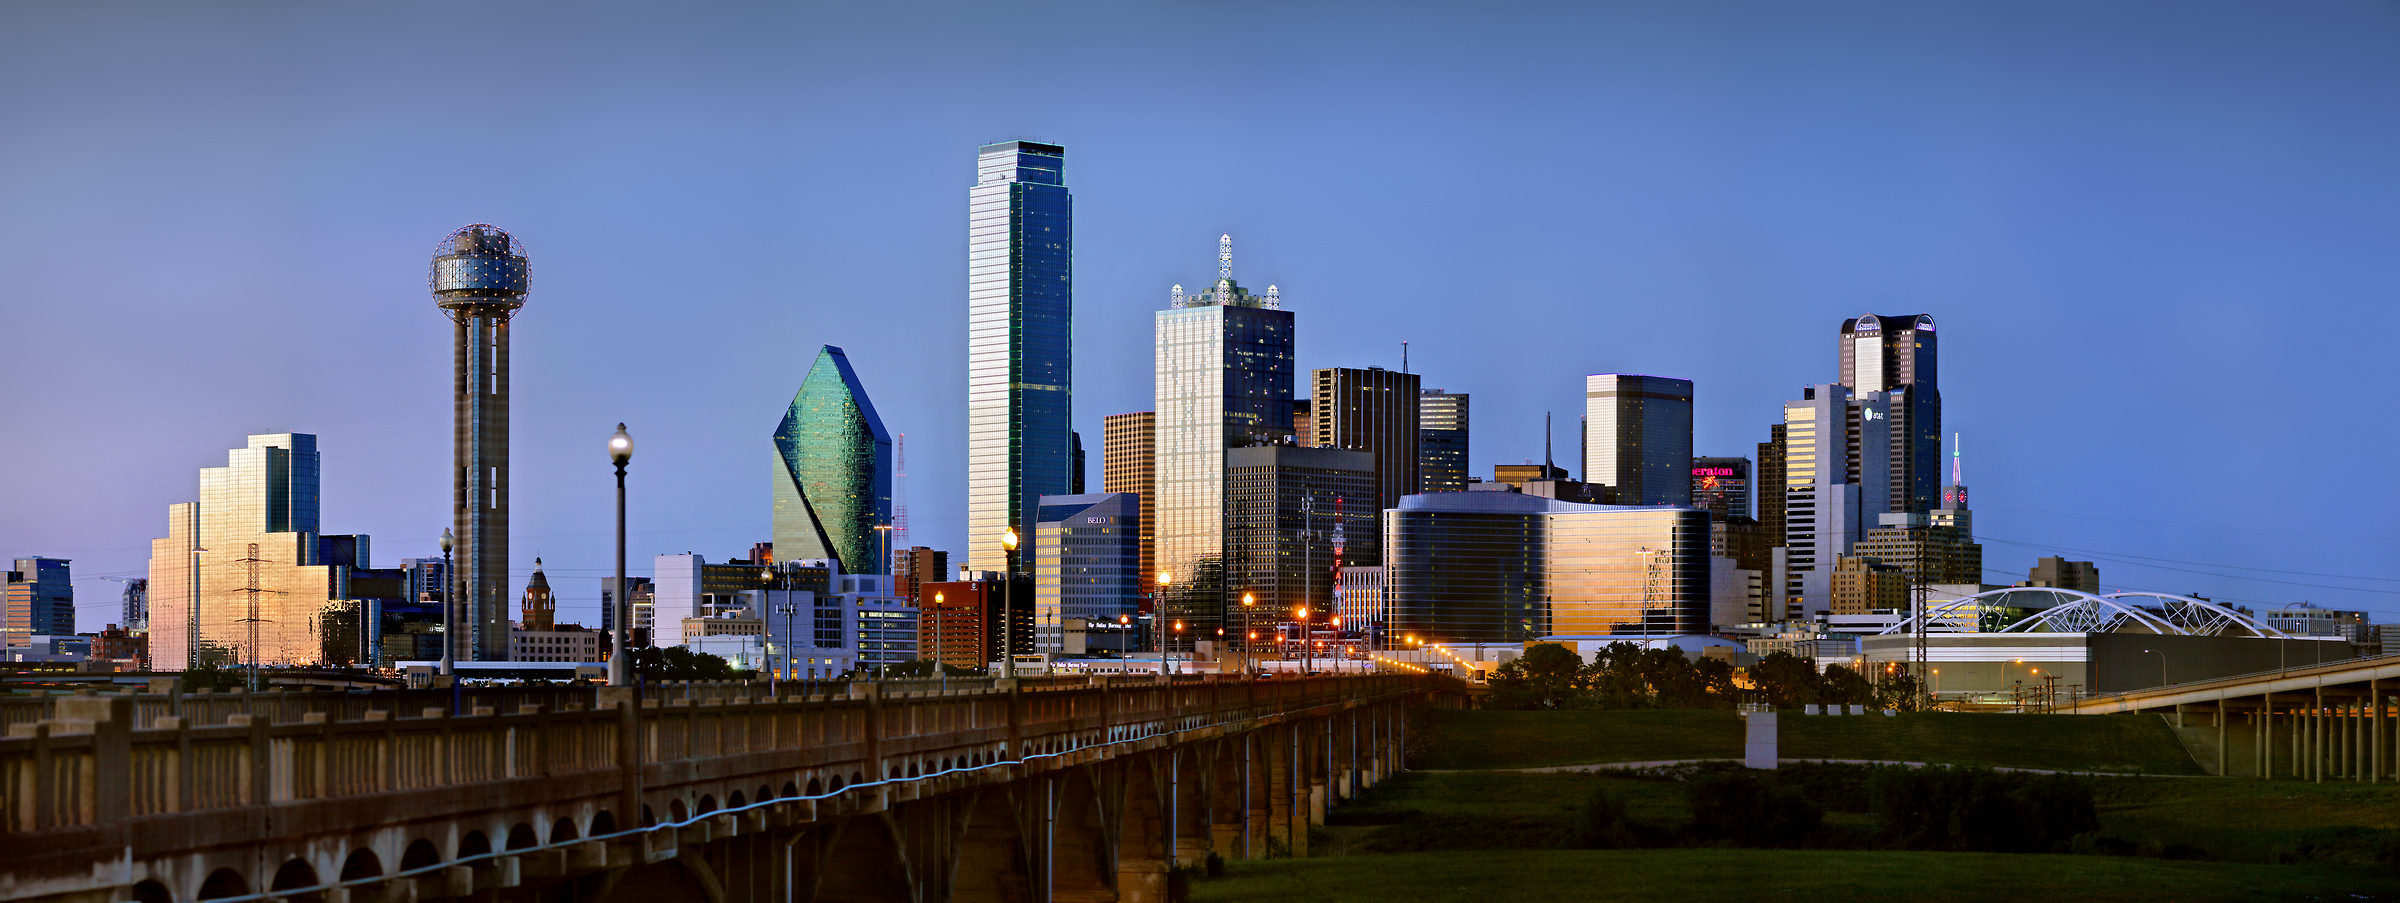 505 megapixels! A very high resolution skyline photo of Dallas; VAST photo created by Phil Crawshay in Dallas, Texas, USA.